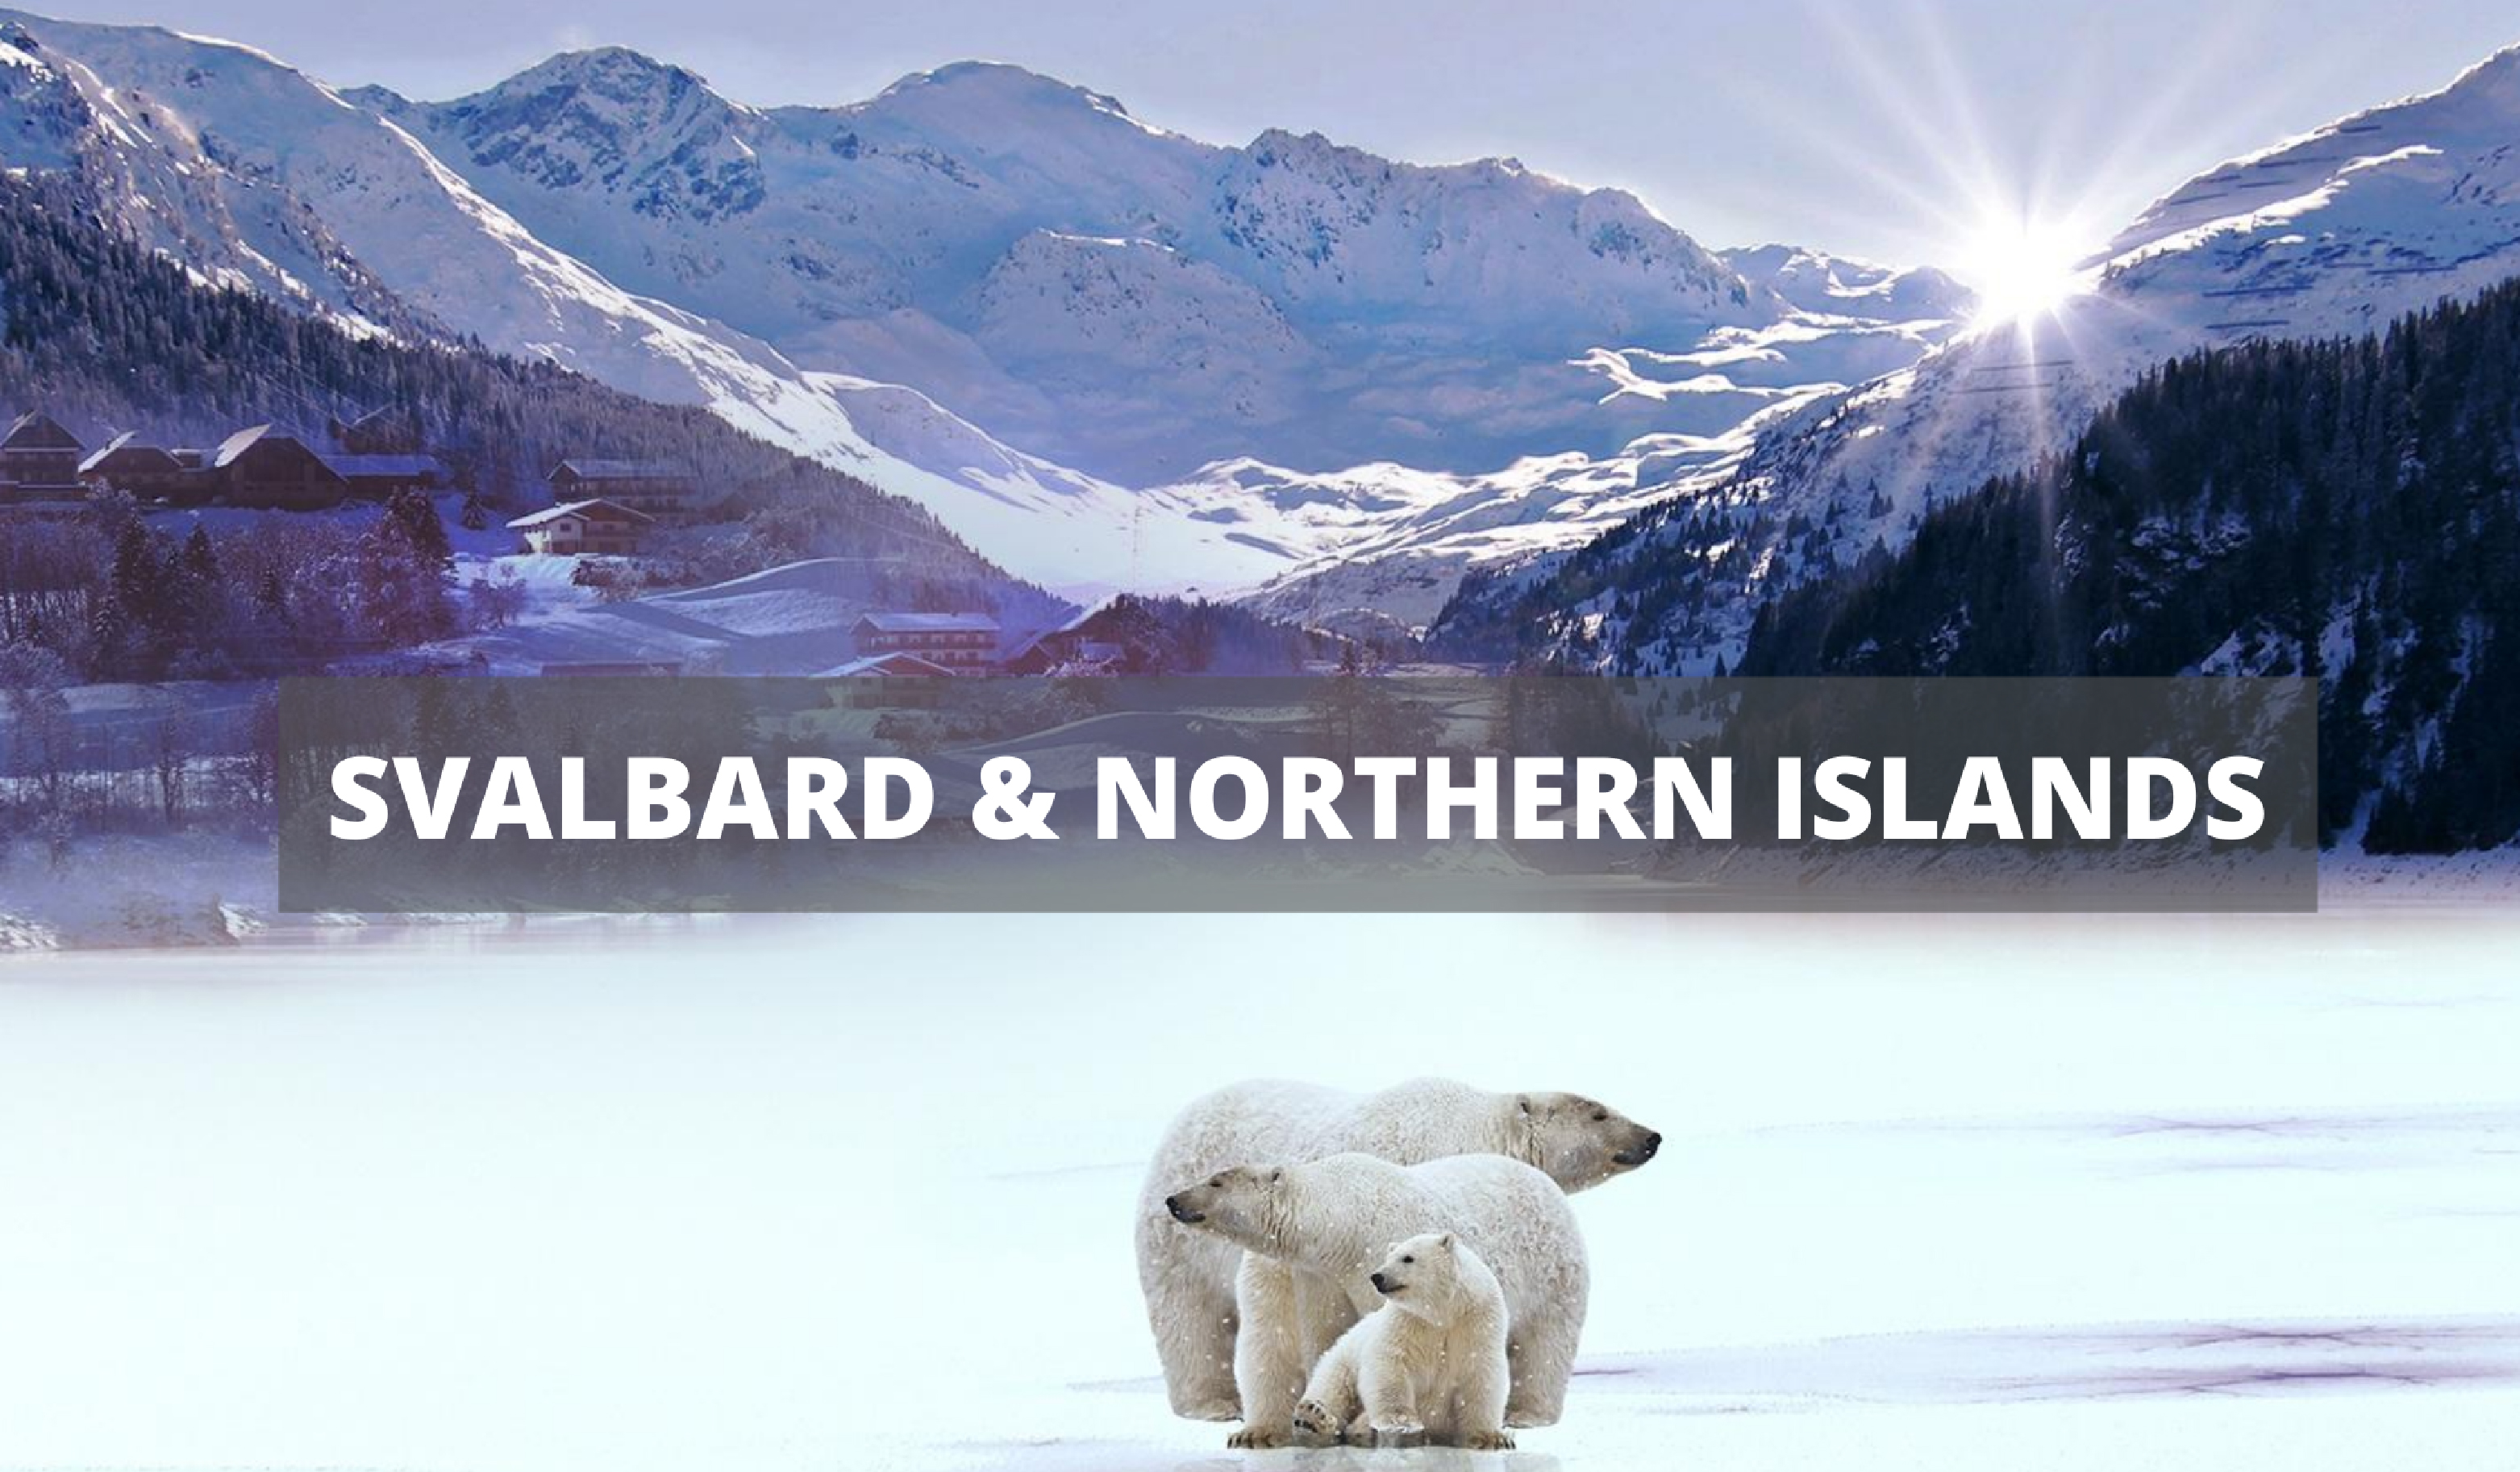 SVALBARD AND NORTHERN ISLANDS